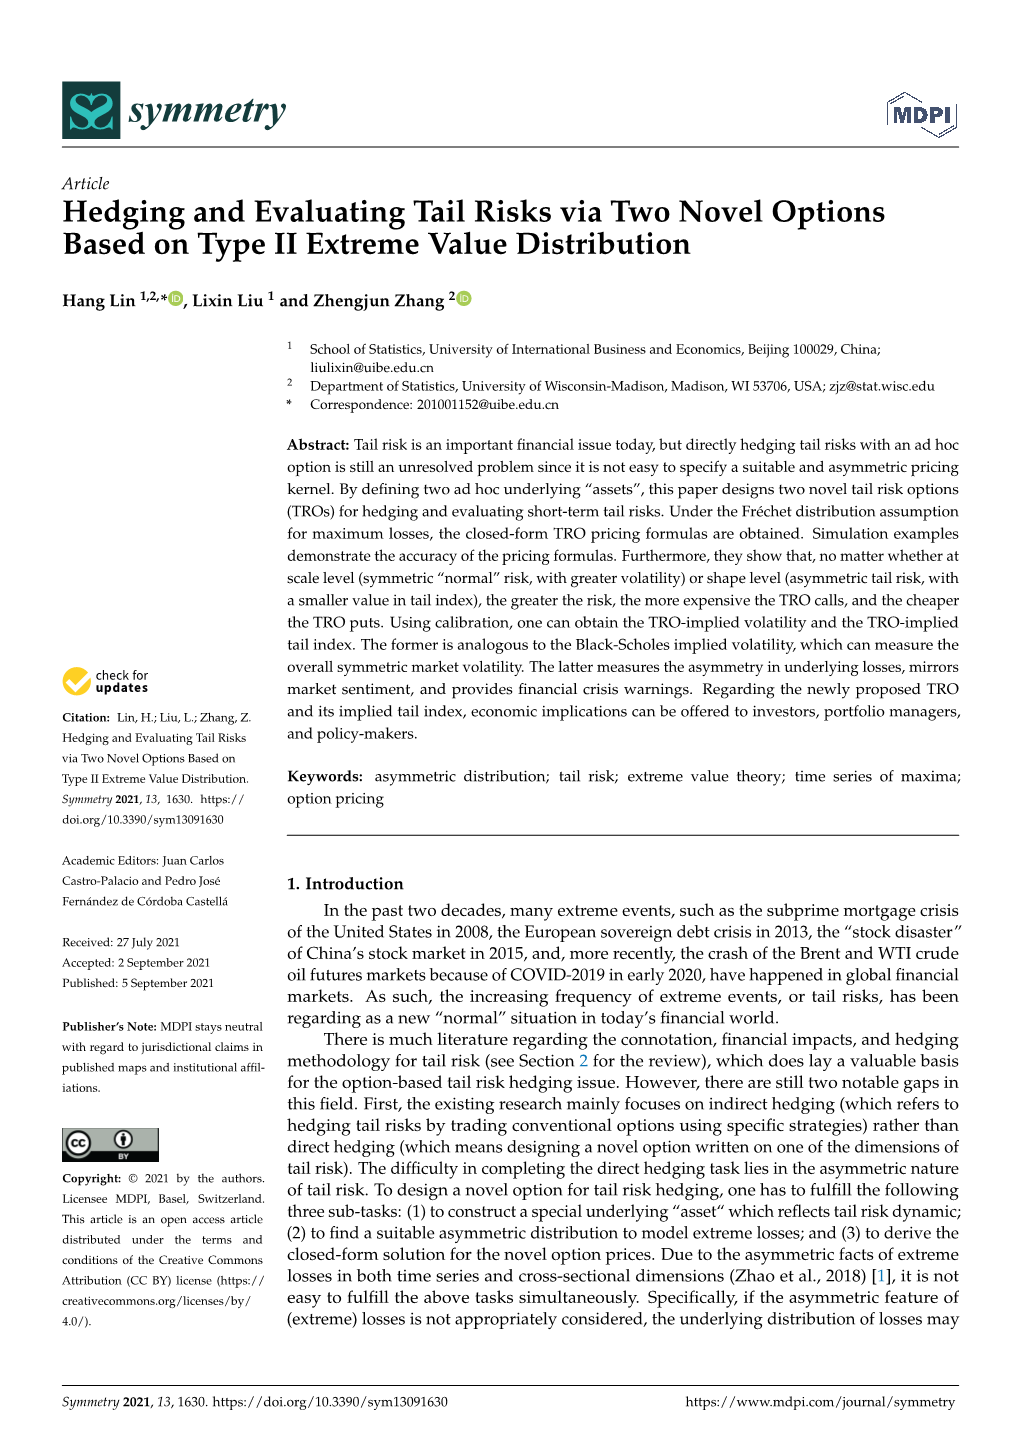 Hedging and Evaluating Tail Risks Via Two Novel Options Based on Type II Extreme Value Distribution